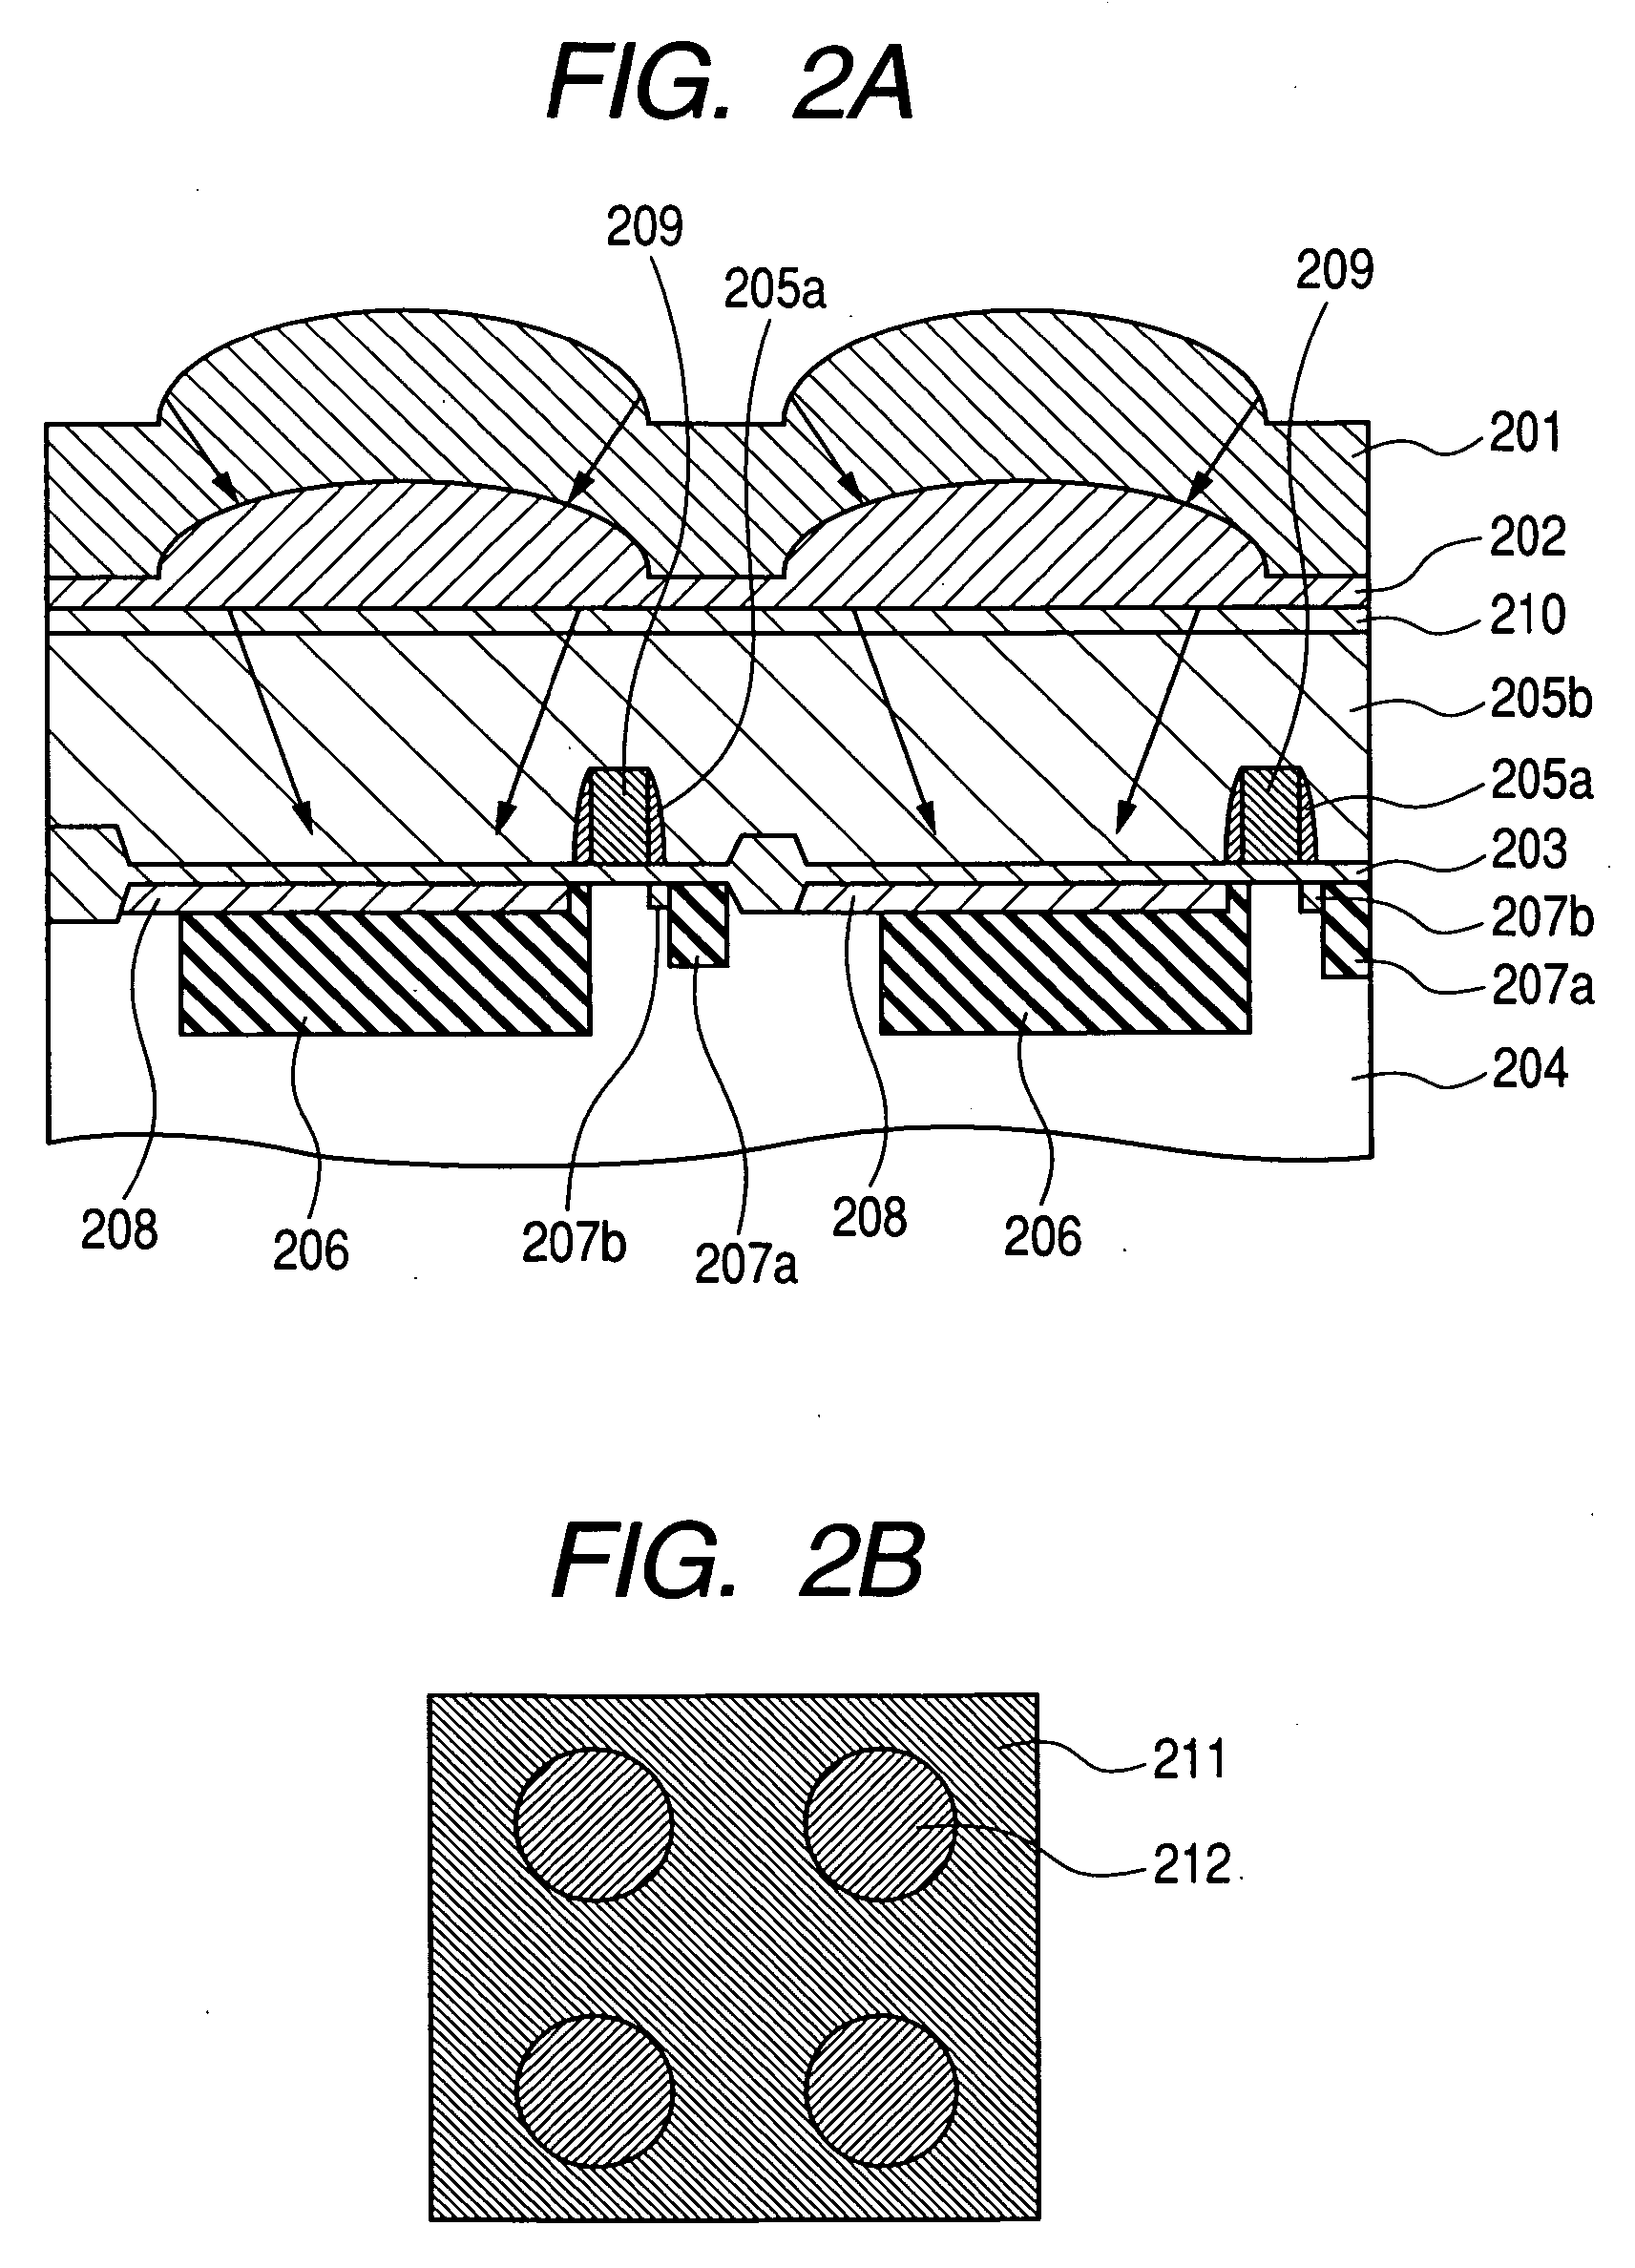 Solid state imaging device, method of manufacturing same, and digital camera